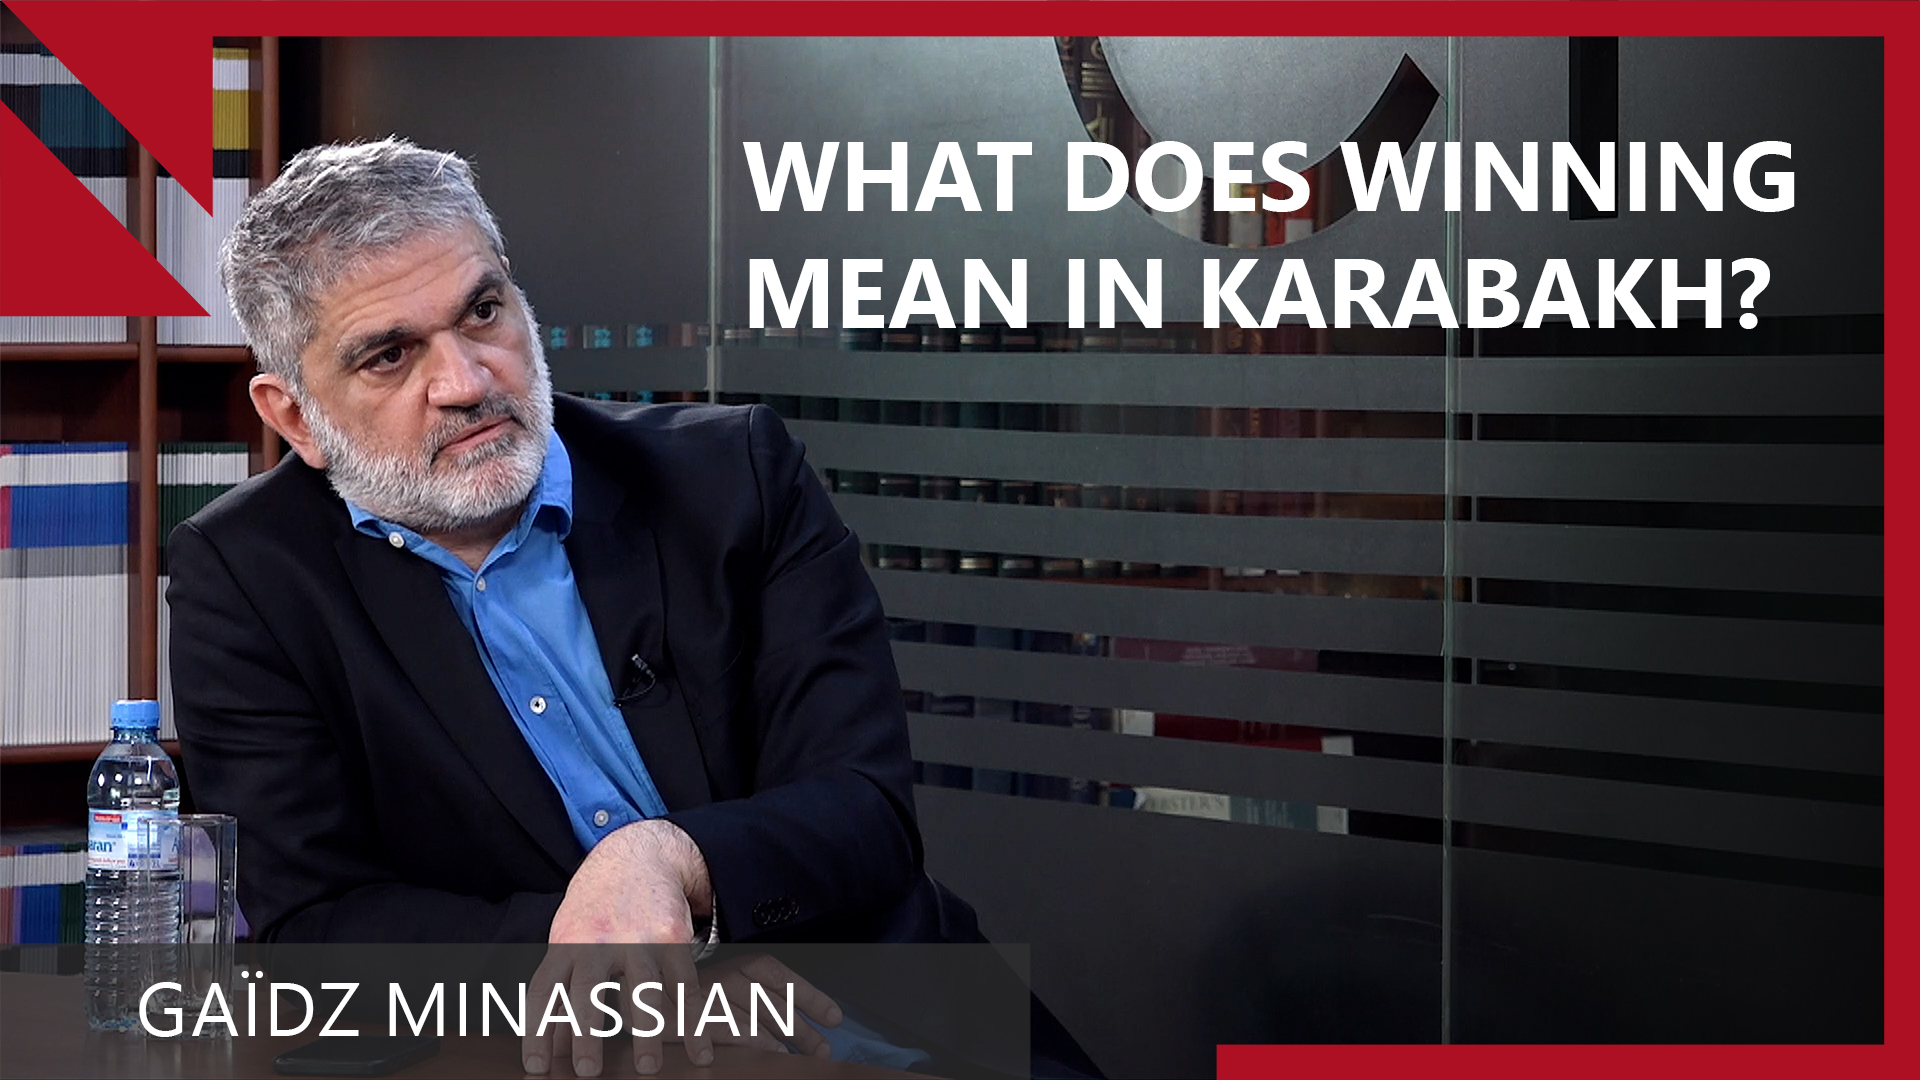 What does “winning” mean in Karabakh?